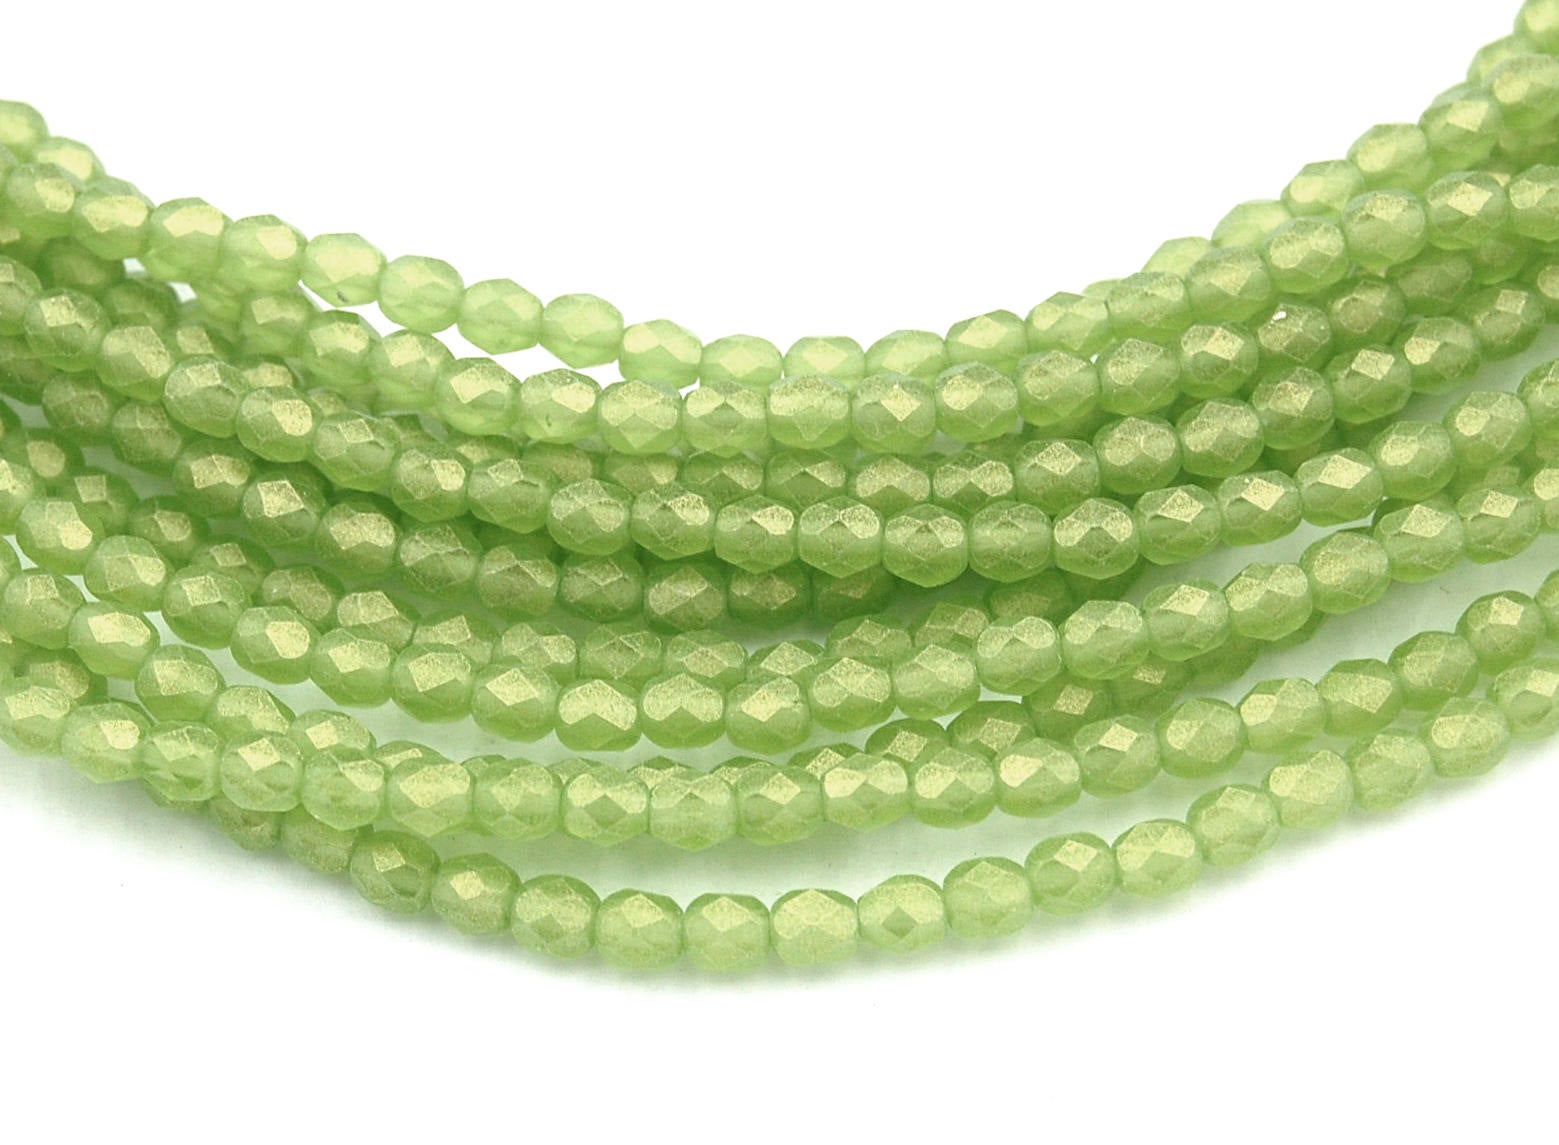 Fire Polished Sueded Gold Olivine Green Glass Bead 4mm Round - 50